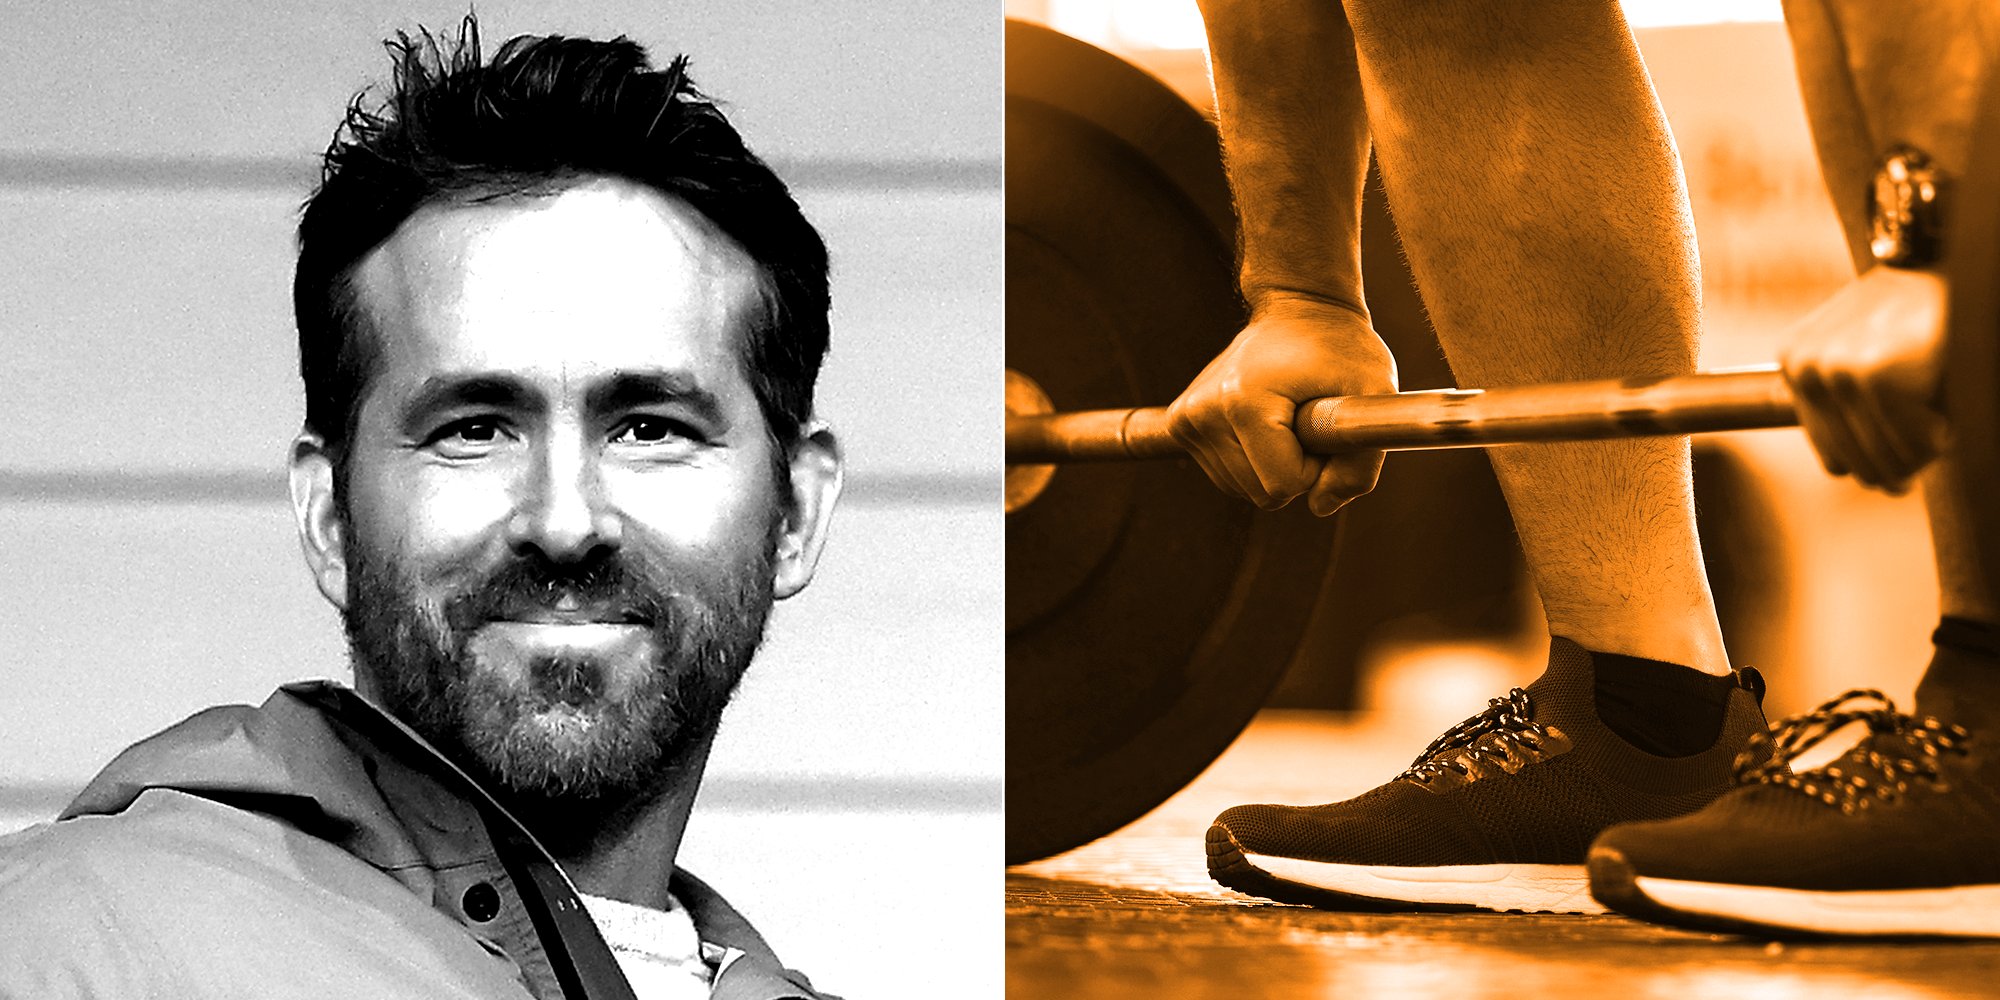 This is Ryan Reynolds’ fitness and longevity routine